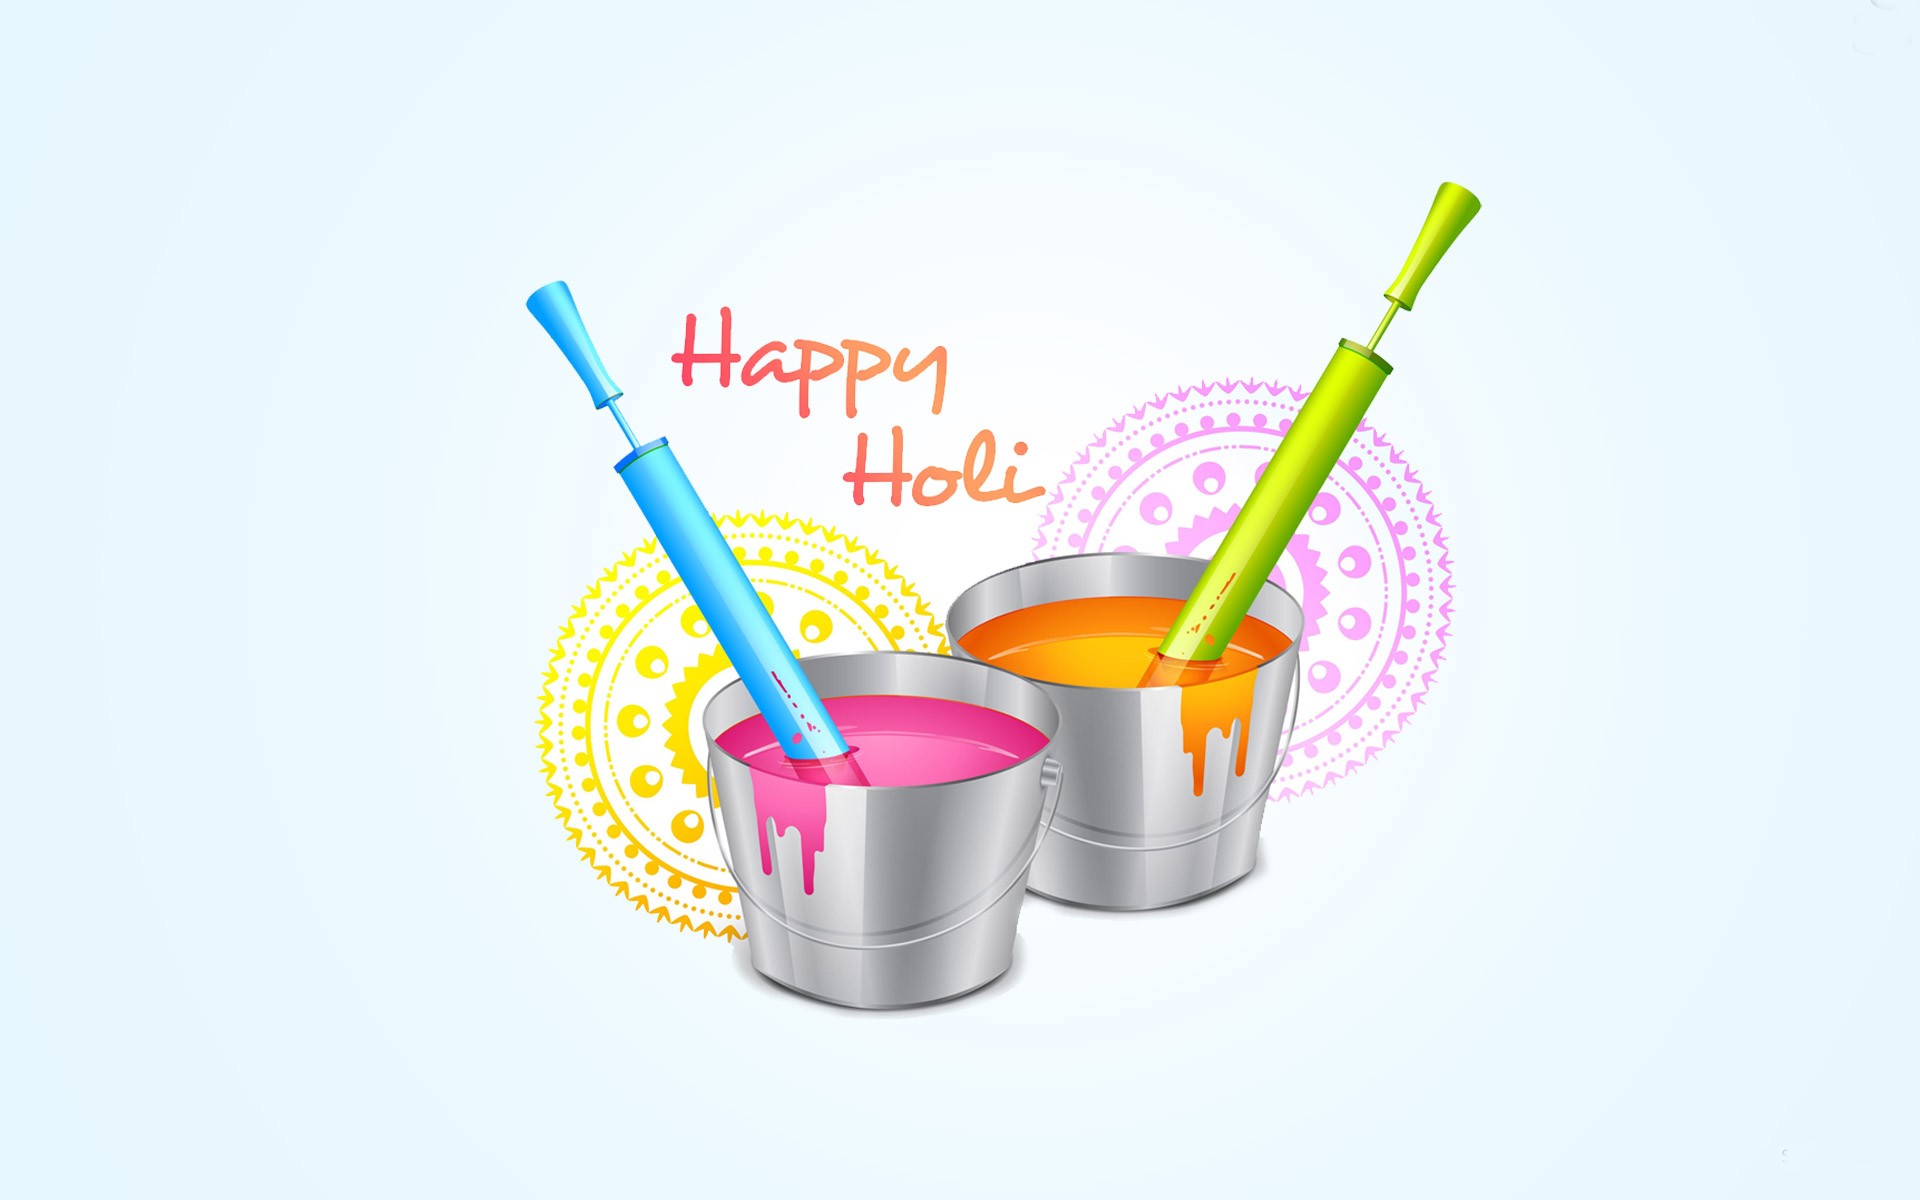 Download Happy holi background - Holi wallpapers and image for your mobile  cell phone